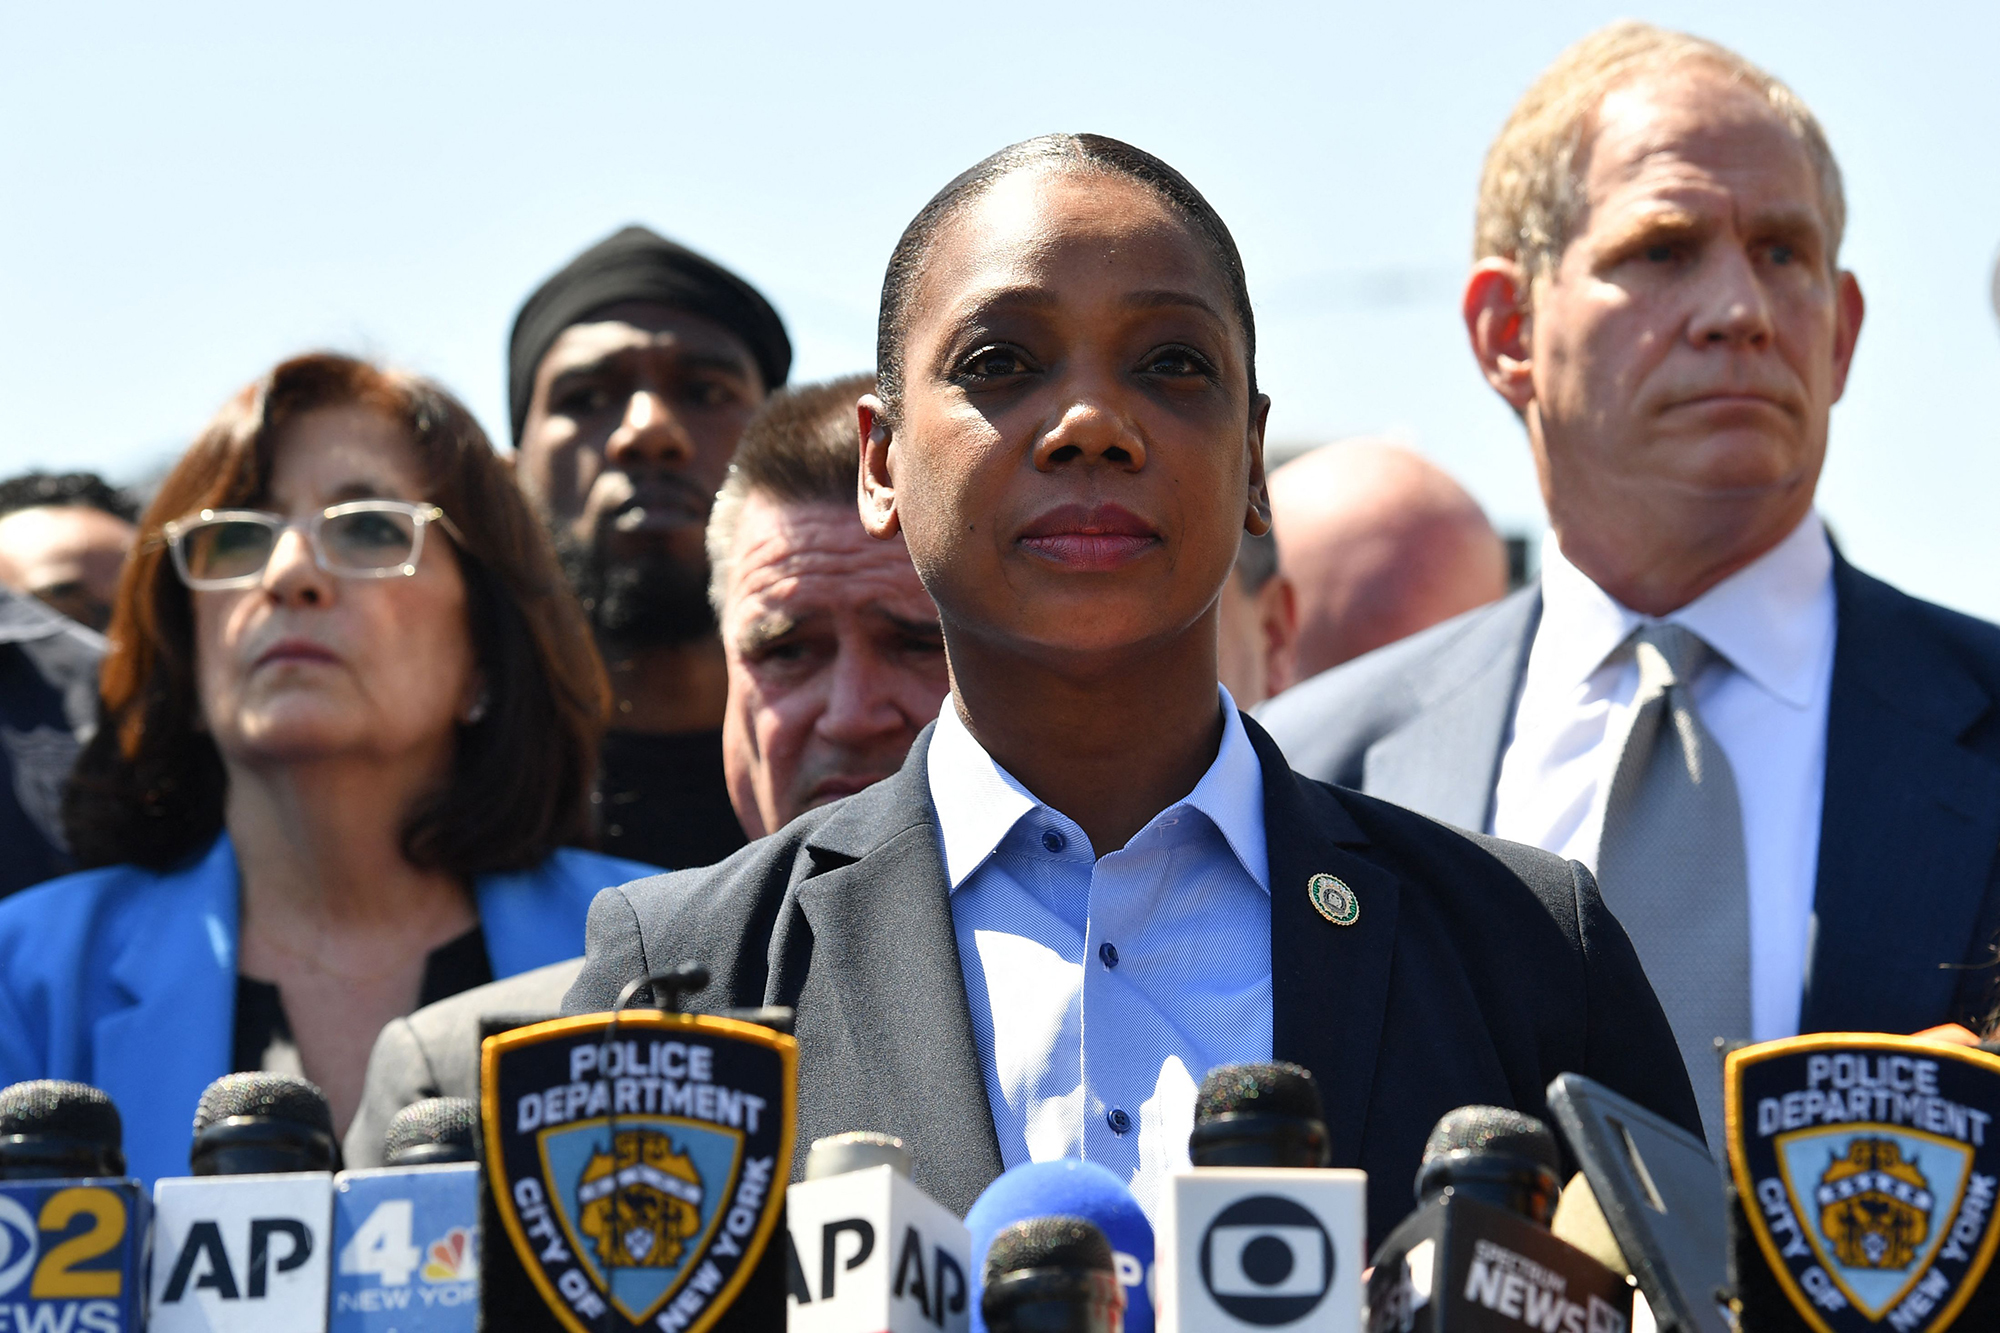 New York Police Department Commissioner Keechant L. Sewell speaks during a press conference following the shooting on April 12 in New York City.